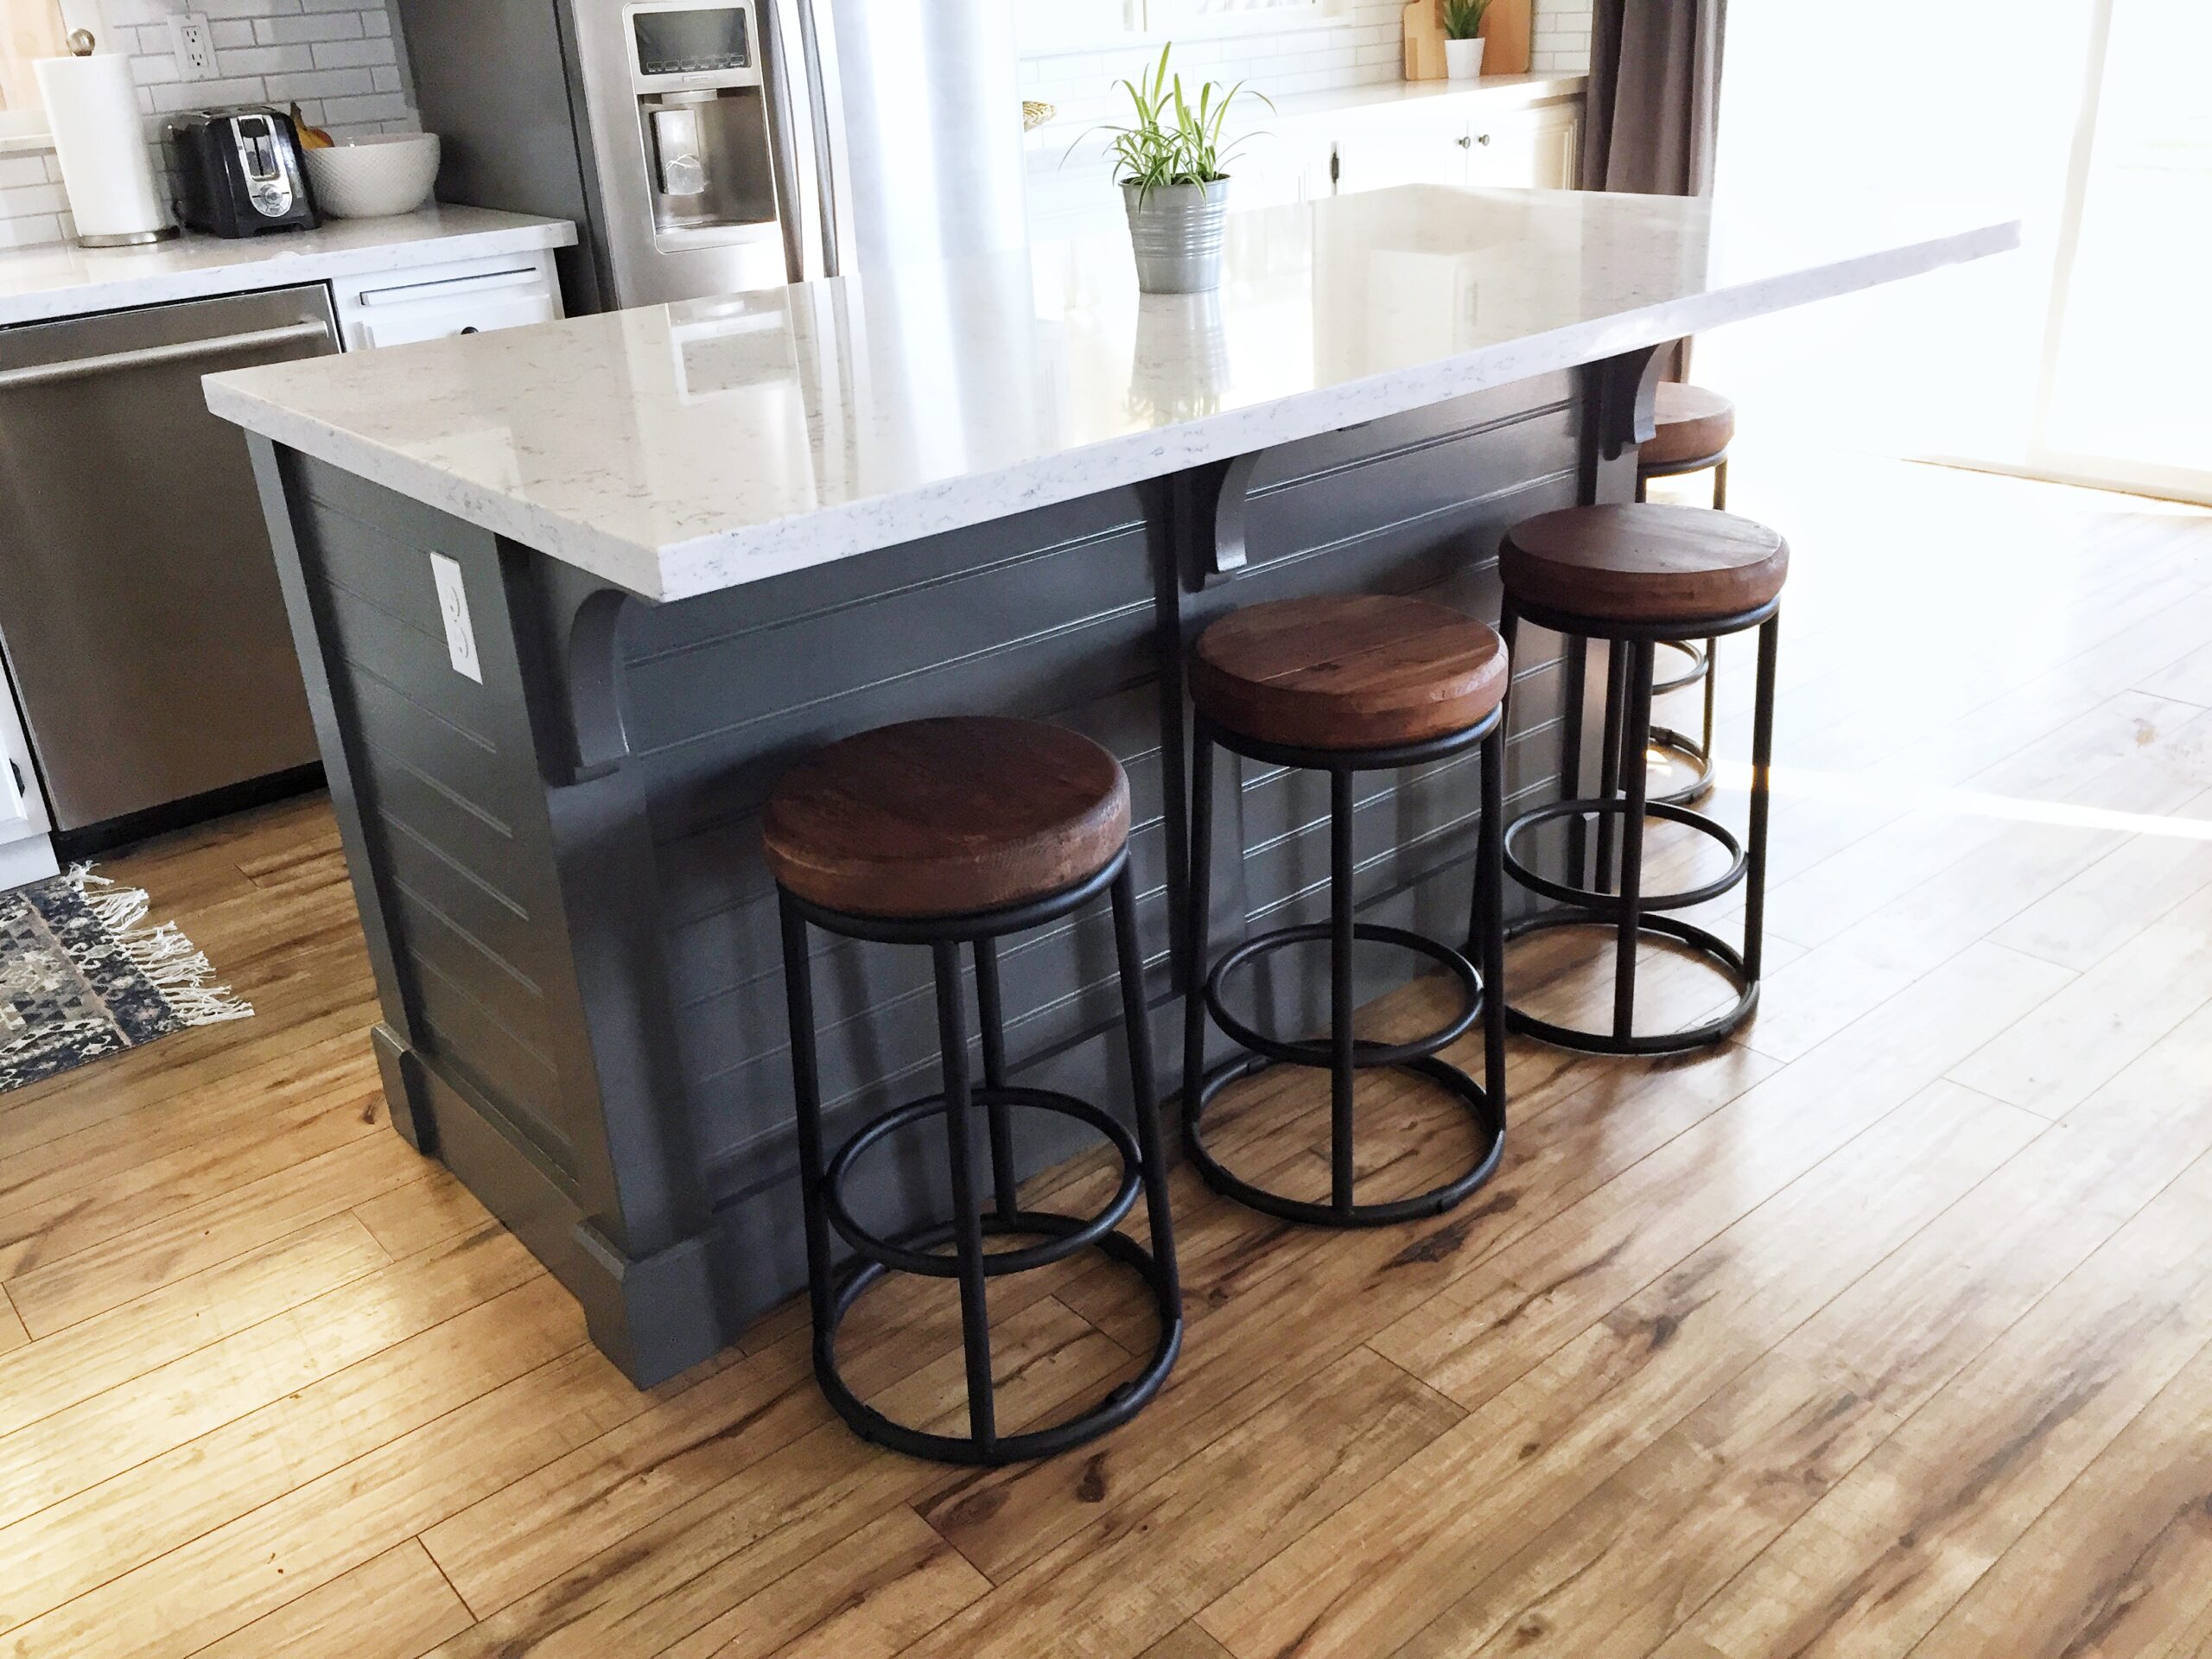 A Diy Kitchen Island Make It Yourself, How To Make A Kitchen Island Out Of Stock Cabinets